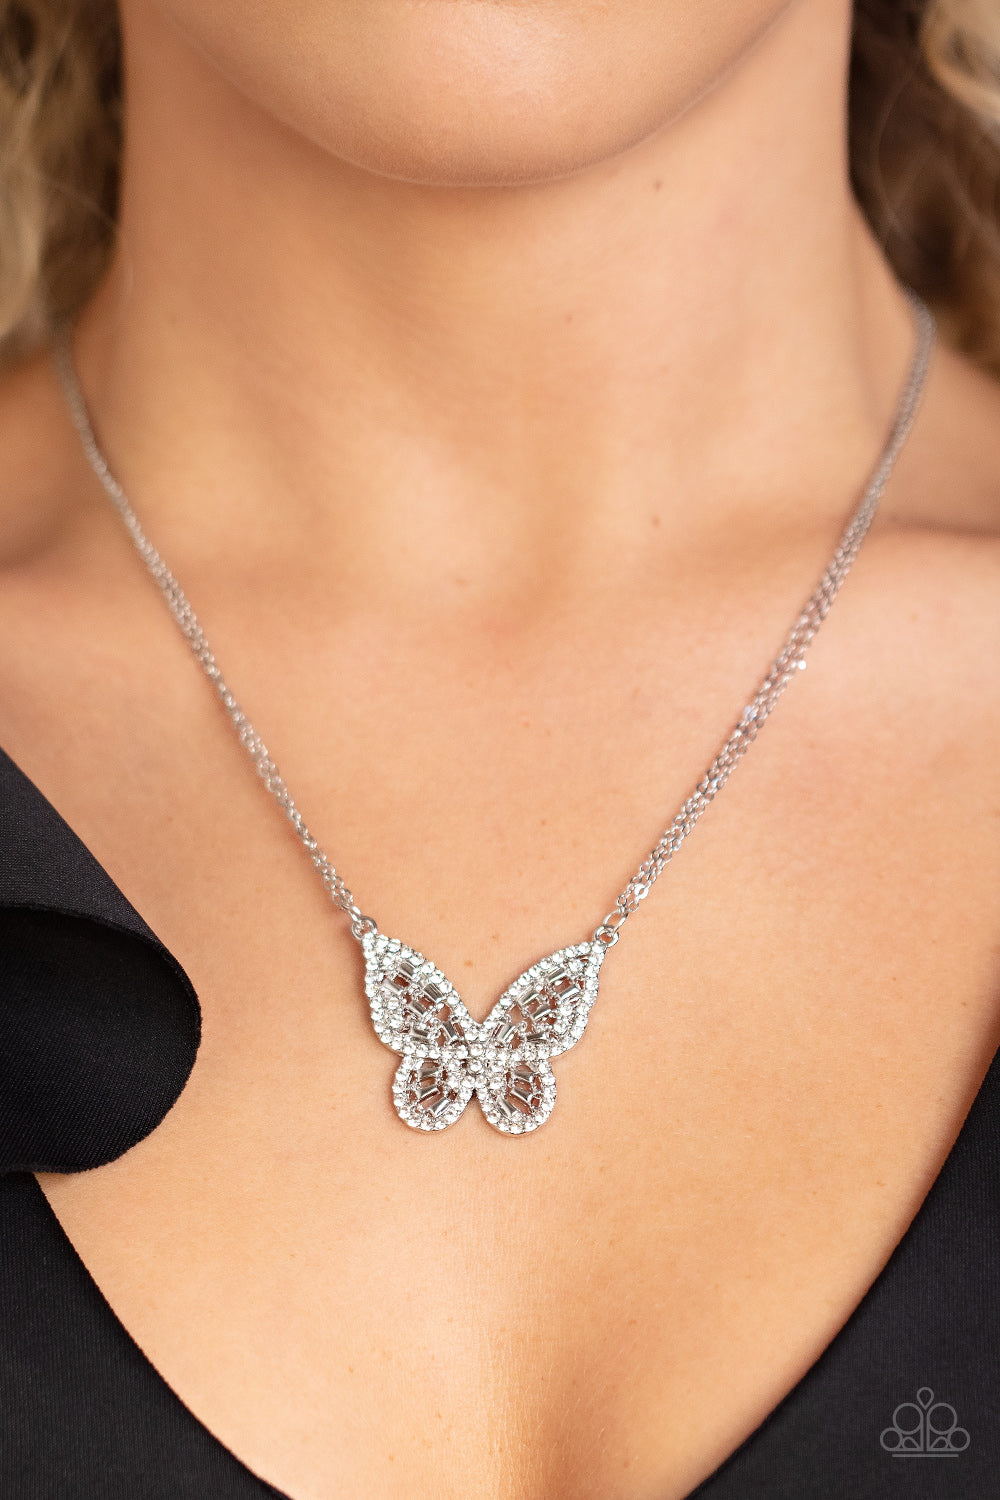 Grandest Birch Women Necklace Creative All-match Women Jewelry Butterfly  Pendant Clavicle Necklace for Party Rhinestone,Alloy Whit - Walmart.com